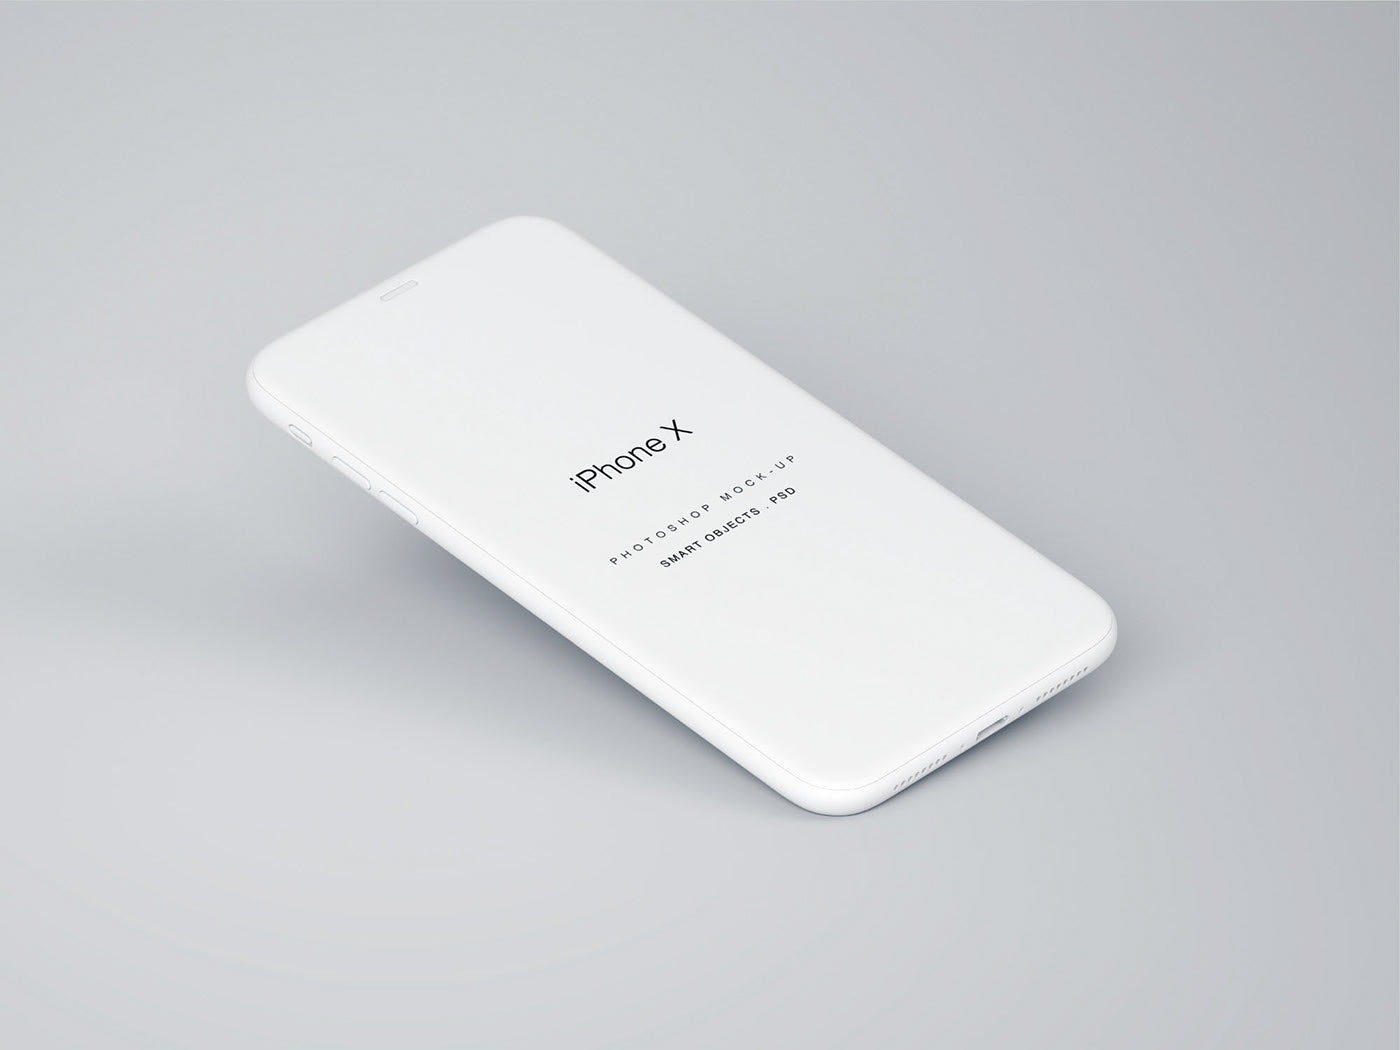 Free Perspective Iphone X Mockup Psd Creativebooster